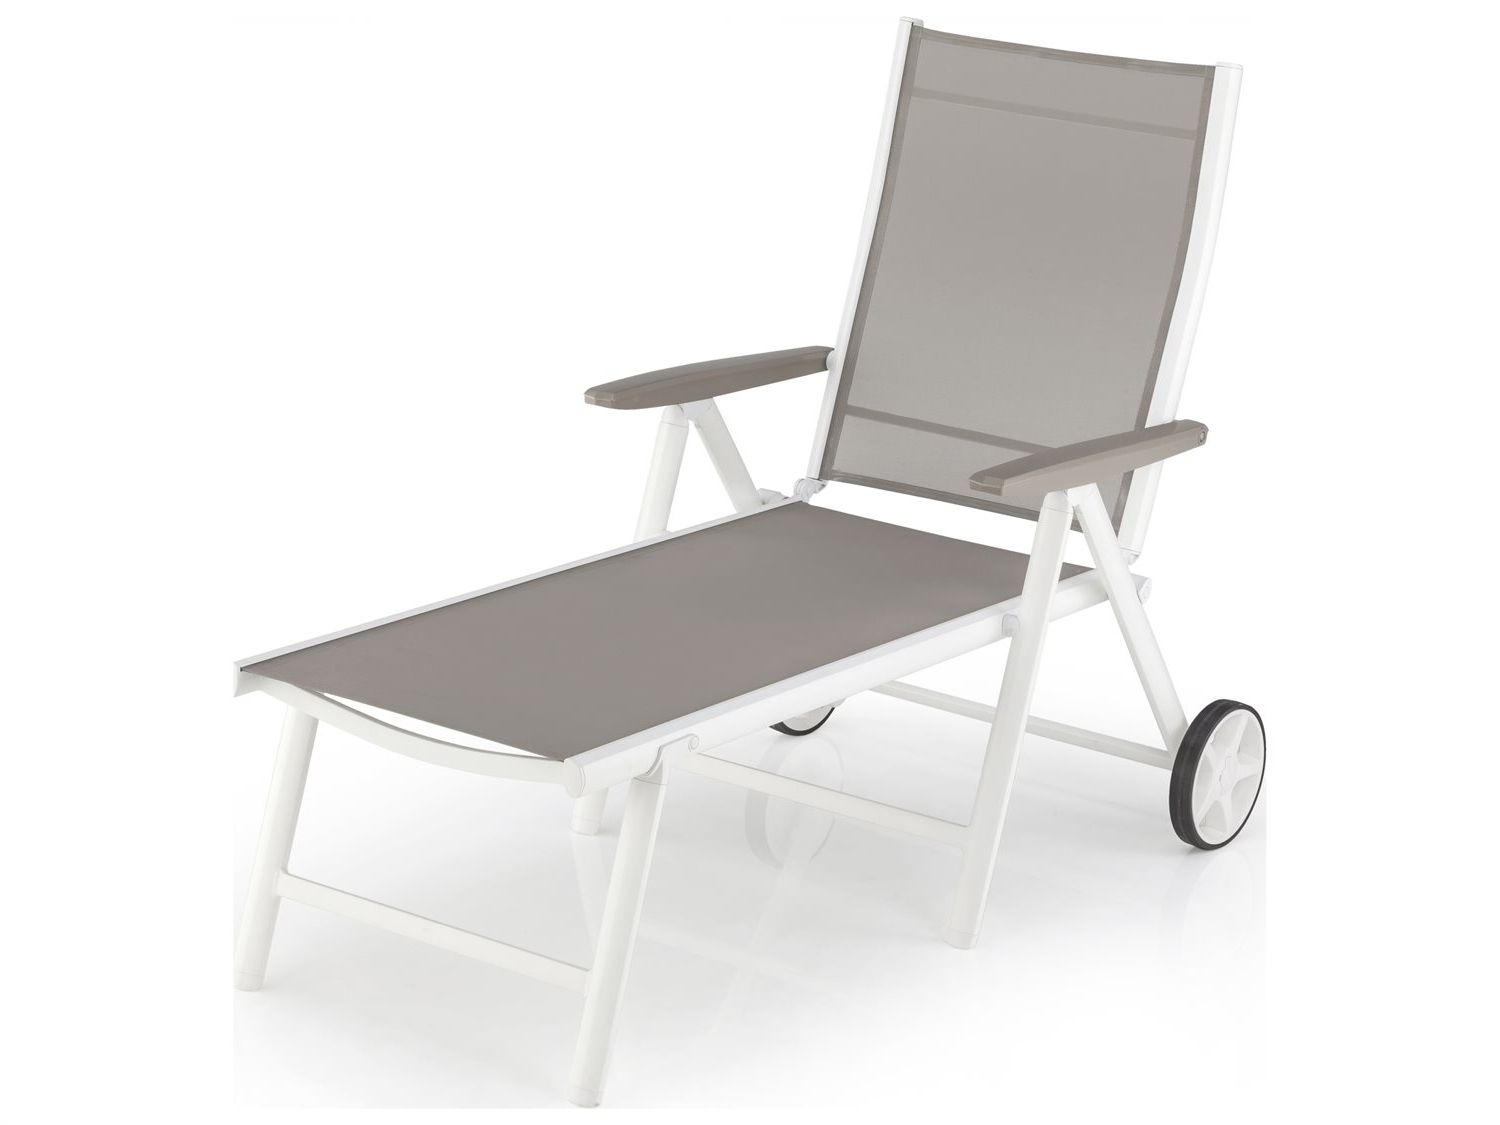 Widely Used Kettler Vista Aluminum Multi Position Chaise Lounge For Multi Position Iron Chaise Lounges (View 14 of 25)